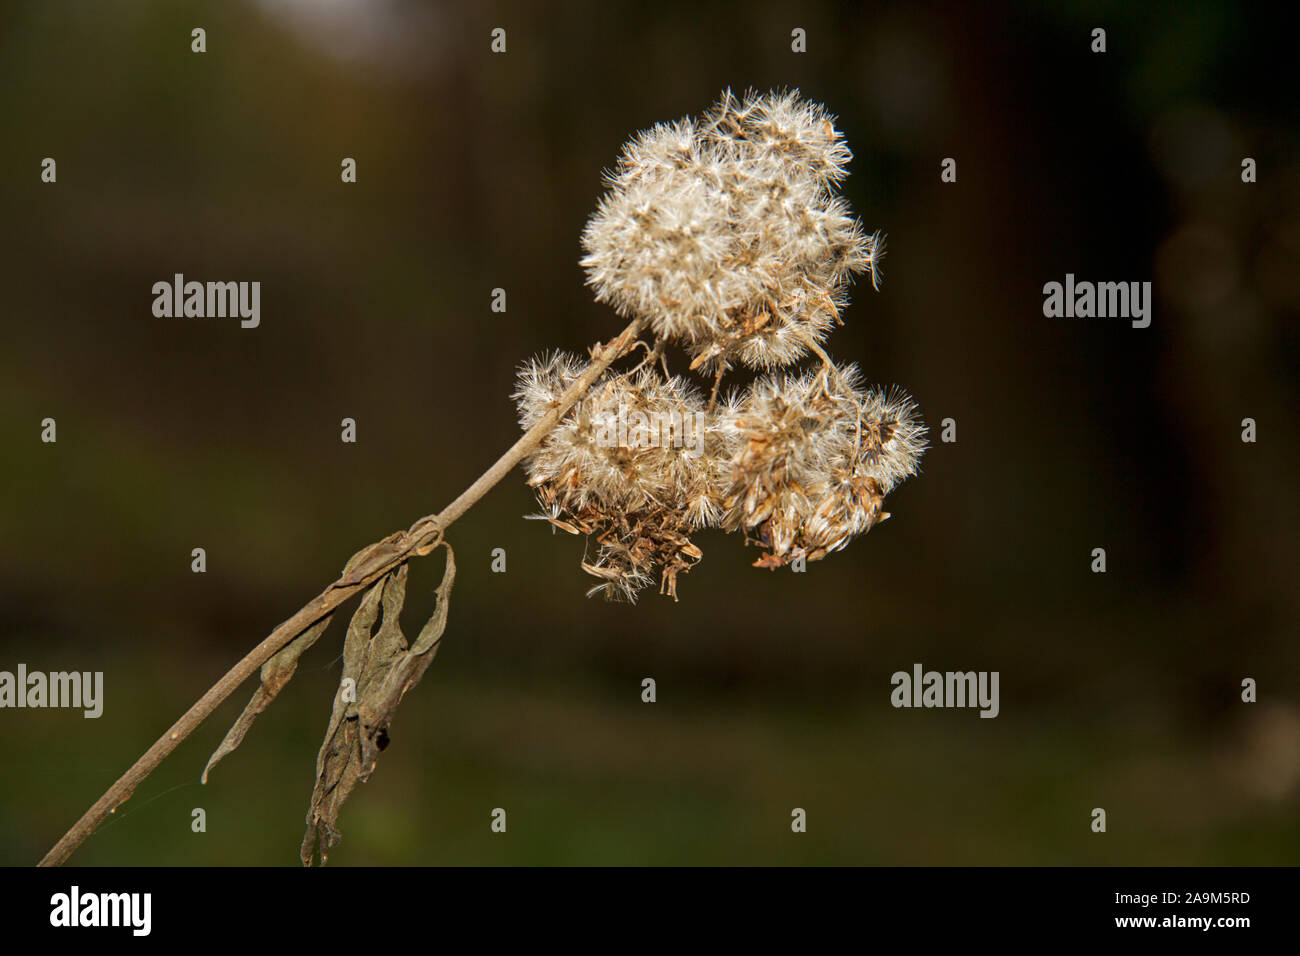 Close-up of a withered flower head of Ragwort, Senecio jacobaea Stock Photo